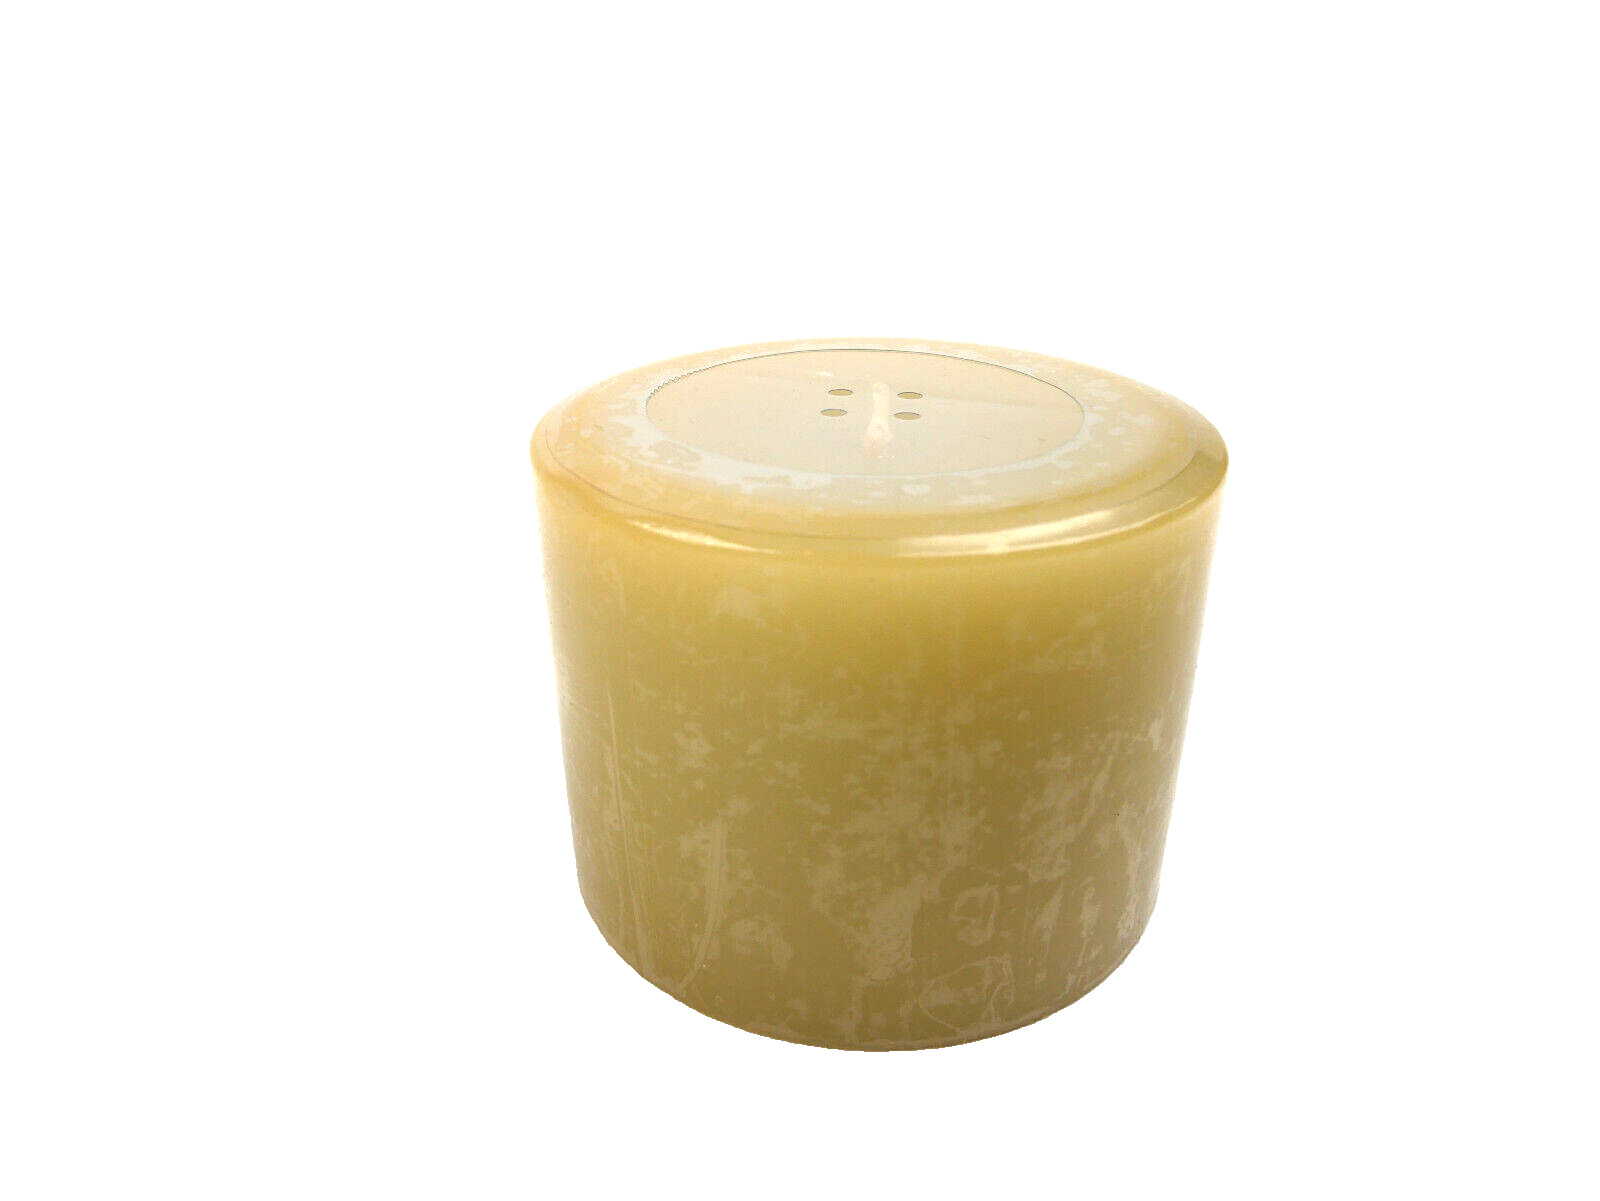 Longaberger Pint Size Pillar Candle - Crisp Cucumber Scent NEW Ivory Made in USA